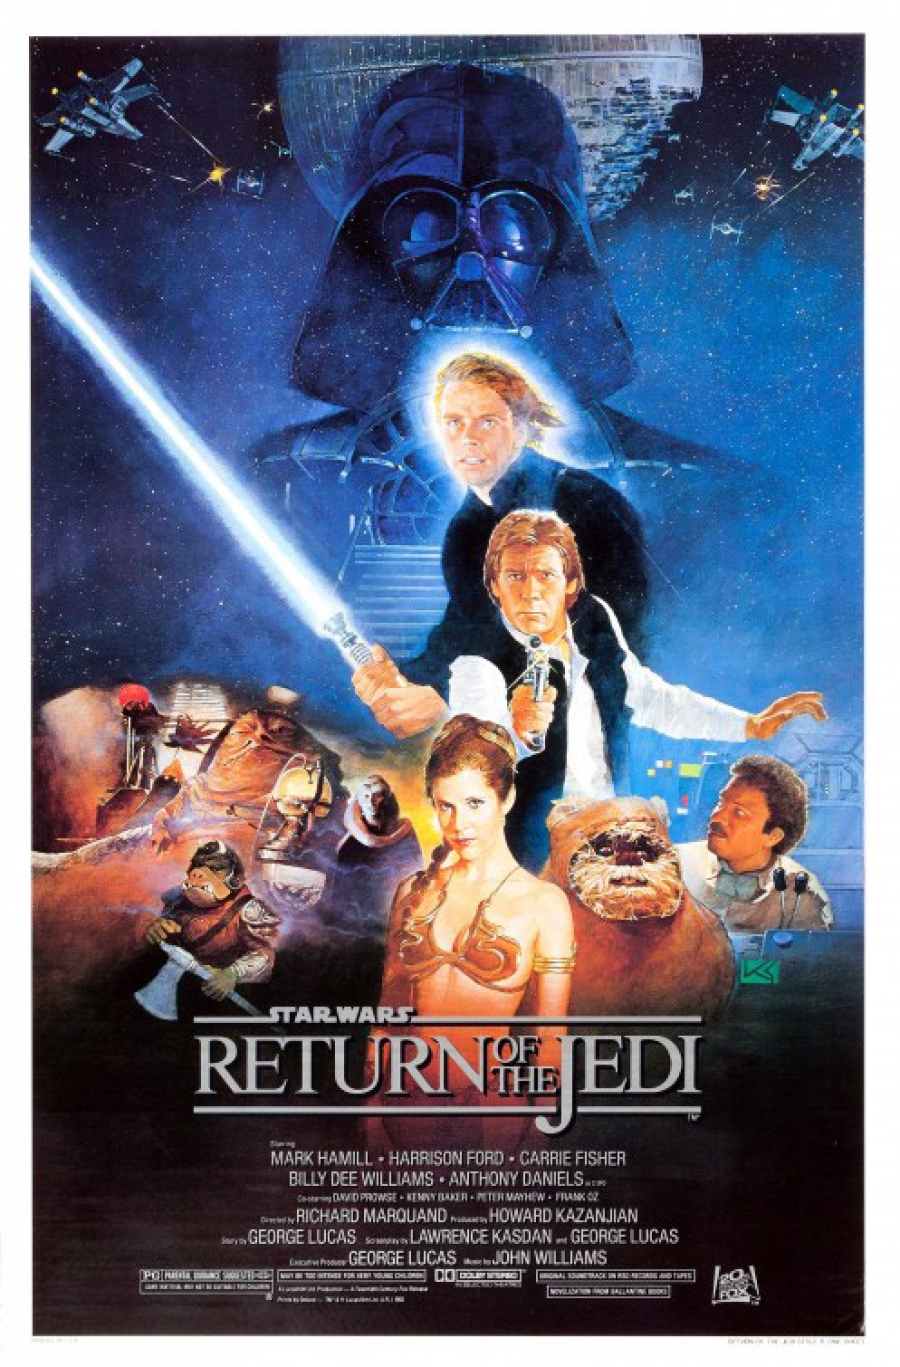 Celebrate the Love: Remembering “Return of the Jedi” on its 35th Anniversary